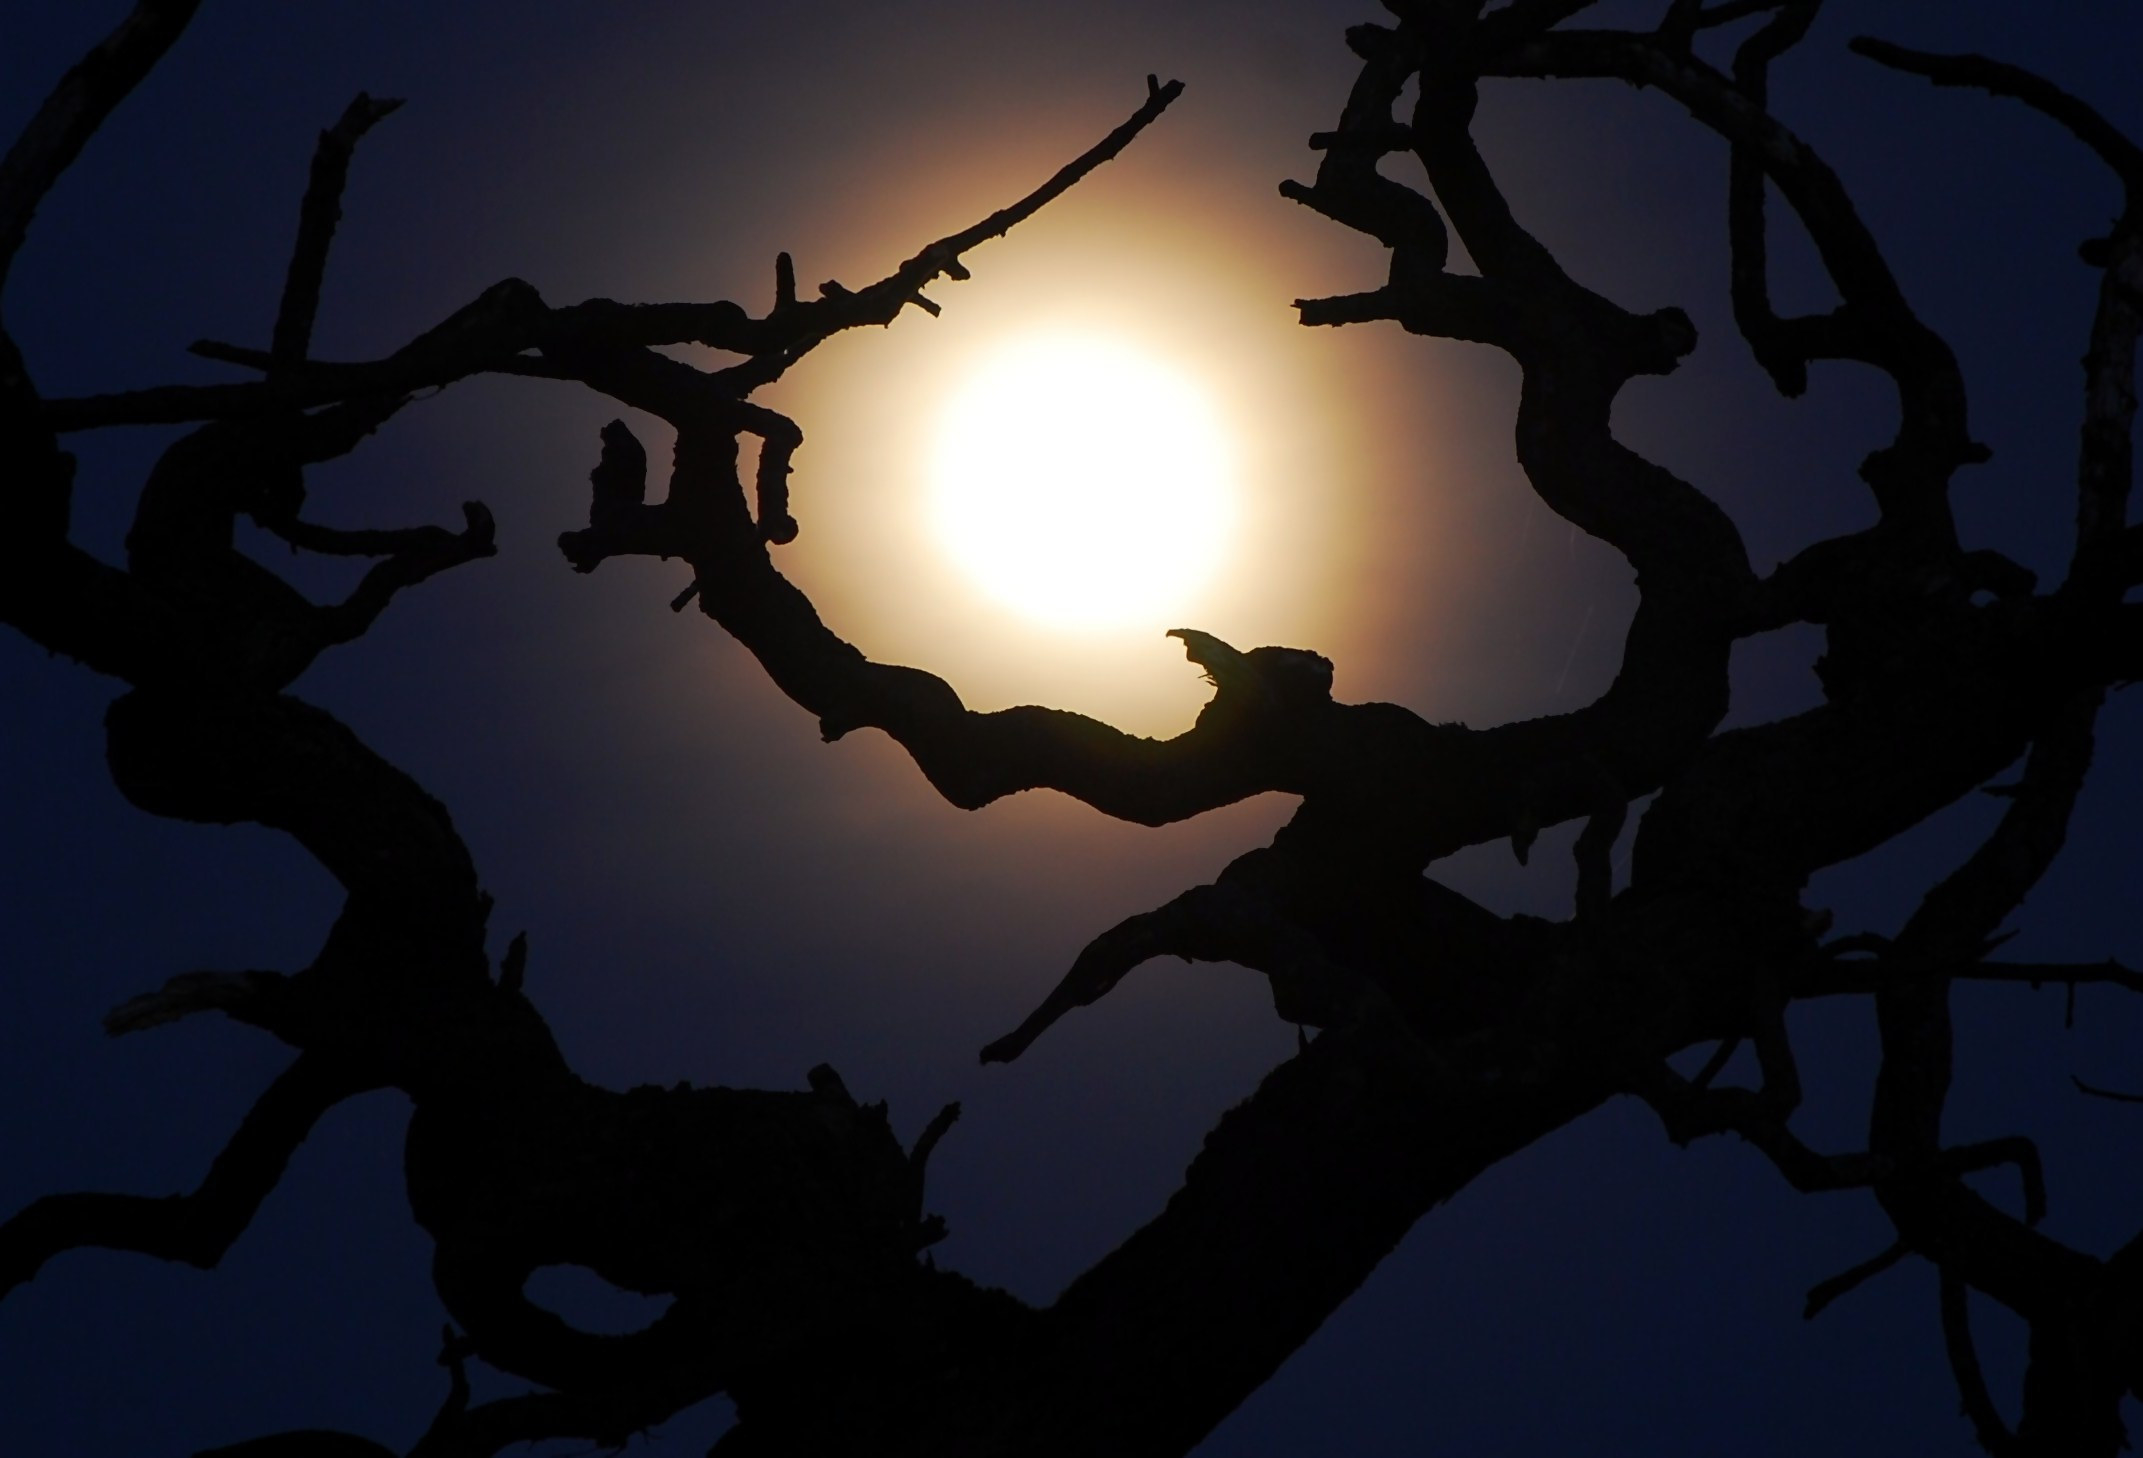 Moonlight through spooky tree branches